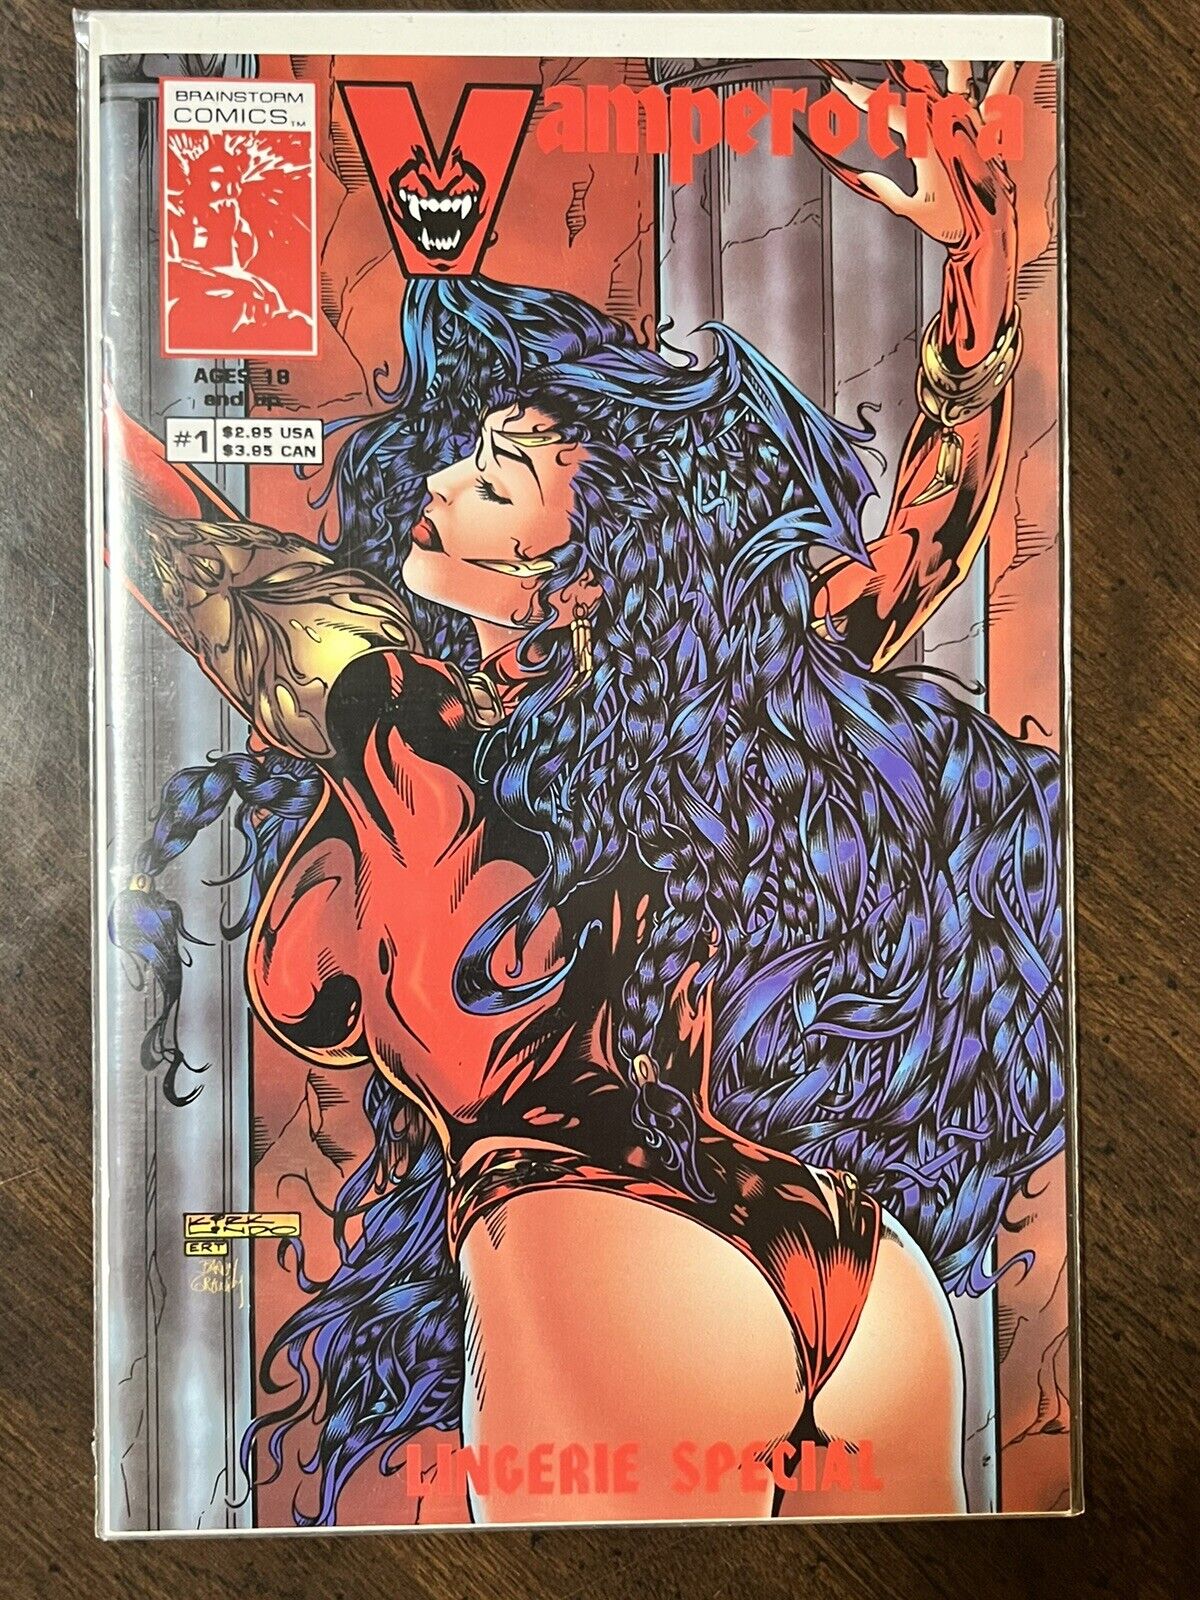 VAMPEROTICA LINGERIE SPECIAL #1 (Brainstorm; 1995) ADULTS ONLY  New C054